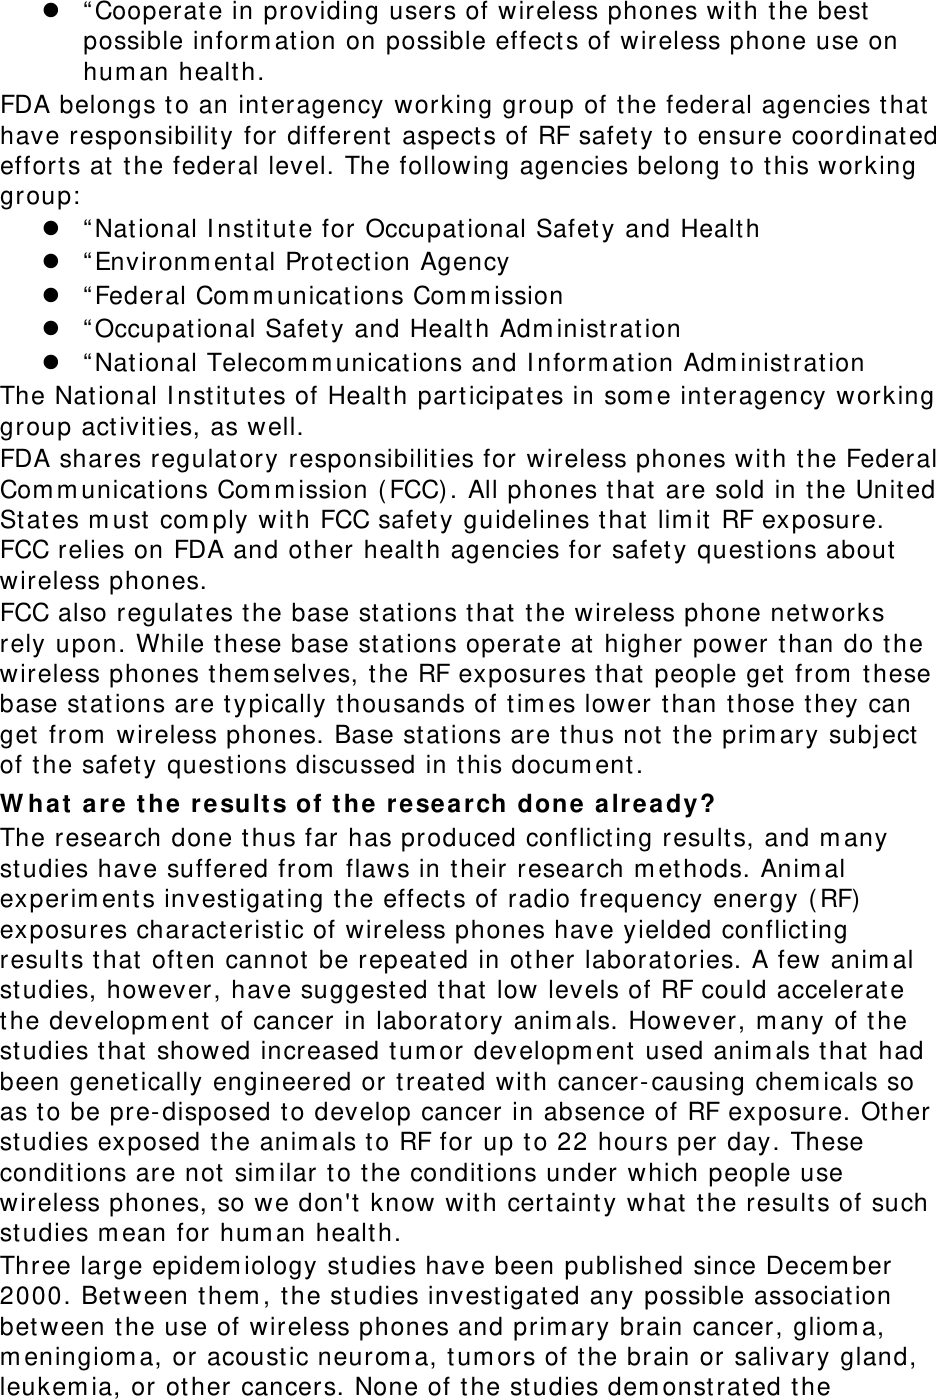 z “ Cooperate in providing users of wireless phones with t he best  possible inform ation on possible effect s of wireless phone use on hum an healt h. FDA belongs to an interagency working group of the federal agencies t hat have responsibility for different aspect s of RF safet y t o ensure coordinat ed efforts at  t he federal level. The following agencies belong t o t his working group:  z “ Nat ional I nst itut e for Occupat ional Safet y and Health z “ Environm ent al Prot ection Agency z “ Federal Com m unicat ions Com m ission z “ Occupational Safety and Health Adm inistration z “ Nat ional Telecom m unications and I nform at ion Adm inist rat ion The National I nstit ut es of Healt h part icipat es in som e int eragency working group act ivit ies, as well. FDA shares regulatory responsibilit ies for wireless phones with t he Federal Com m unicat ions Com m ission ( FCC). All phones t hat are sold in t he Unit ed St at es m ust  com ply wit h FCC safety guidelines t hat  lim it RF exposure. FCC relies on FDA and other health agencies for safety quest ions about wireless phones. FCC also regulat es t he base stations that  t he wireless phone networks rely upon. While t hese base st at ions operate at higher power t han do t he wireless phones t hem selves, the RF exposures t hat people get  from  t hese base stations are t ypically thousands of tim es lower than t hose they can get  from  wireless phones. Base st at ions are t hus not  t he prim ary subj ect  of t he safet y quest ions discussed in this docum ent . W ha t ar e t he  result s of t he  re search done alr ea dy? The research done t hus far has produced conflict ing result s, and m any studies have suffered from  flaws in t heir research m ethods. Anim al experim ent s invest igat ing the effect s of radio frequency energy ( RF) exposures charact erist ic of wireless phones have yielded conflict ing results that  oft en cannot  be repeated in other laborat ories. A few anim al studies, however, have suggest ed t hat  low levels of RF could accelerate the developm ent of cancer in laboratory anim als. However, m any of the studies t hat  showed increased tum or developm ent  used anim als t hat had been genet ically engineered or t reat ed with cancer- causing chem icals so as to be pre- disposed t o develop cancer in absence of RF exposure. Ot her studies exposed t he anim als t o RF for up t o 22 hours per day. These conditions are not sim ilar to t he conditions under which people use wireless phones, so we don&apos;t  know wit h certaint y what t he results of such studies m ean for hum an healt h. Three large epidem iology st udies have been published since Decem ber 2000. Bet ween them , t he studies invest igat ed any possible association bet ween the use of wireless phones and prim ary brain cancer, gliom a, m eningiom a, or acoust ic neurom a, tum ors of t he brain or salivary gland, leukem ia, or other cancers. None of t he studies dem onstrat ed the 